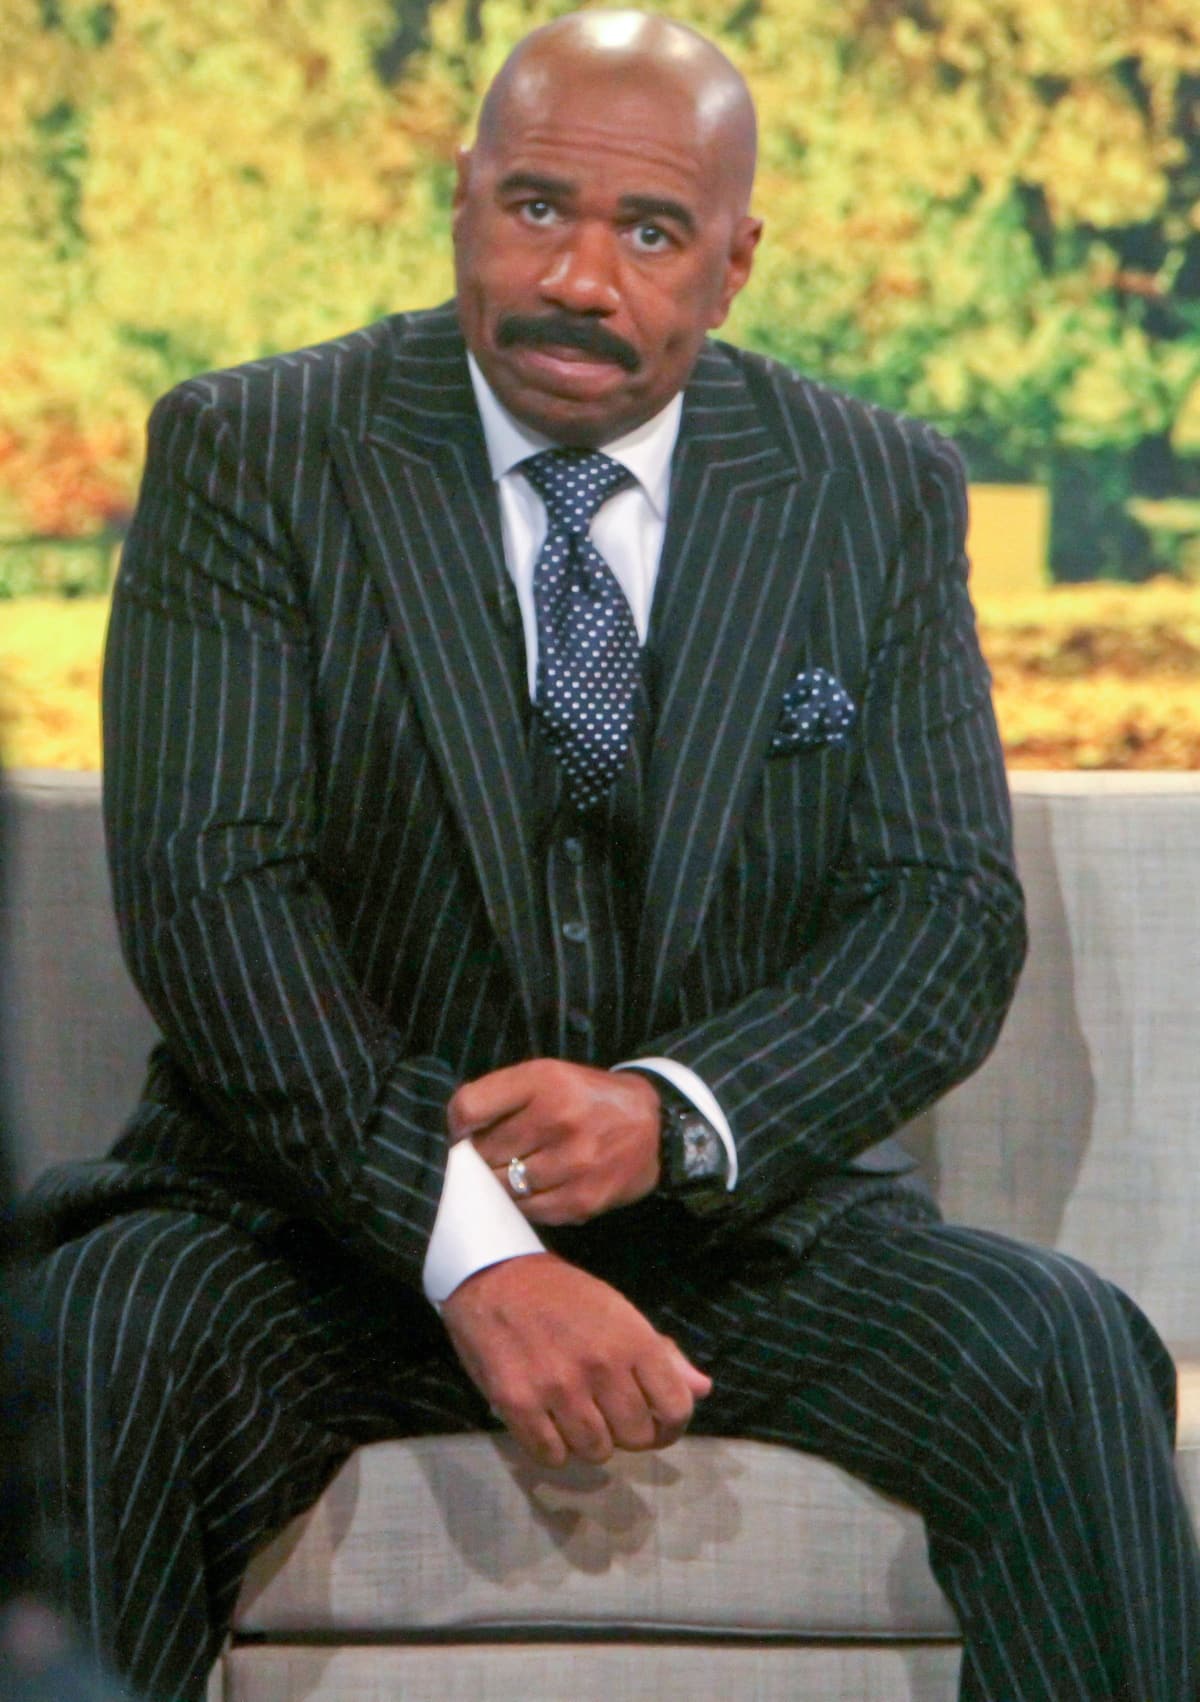 To promote his book Act Like a Lady, Think Like a Man, Steve Harvey made a guest appearance on Good Morning America